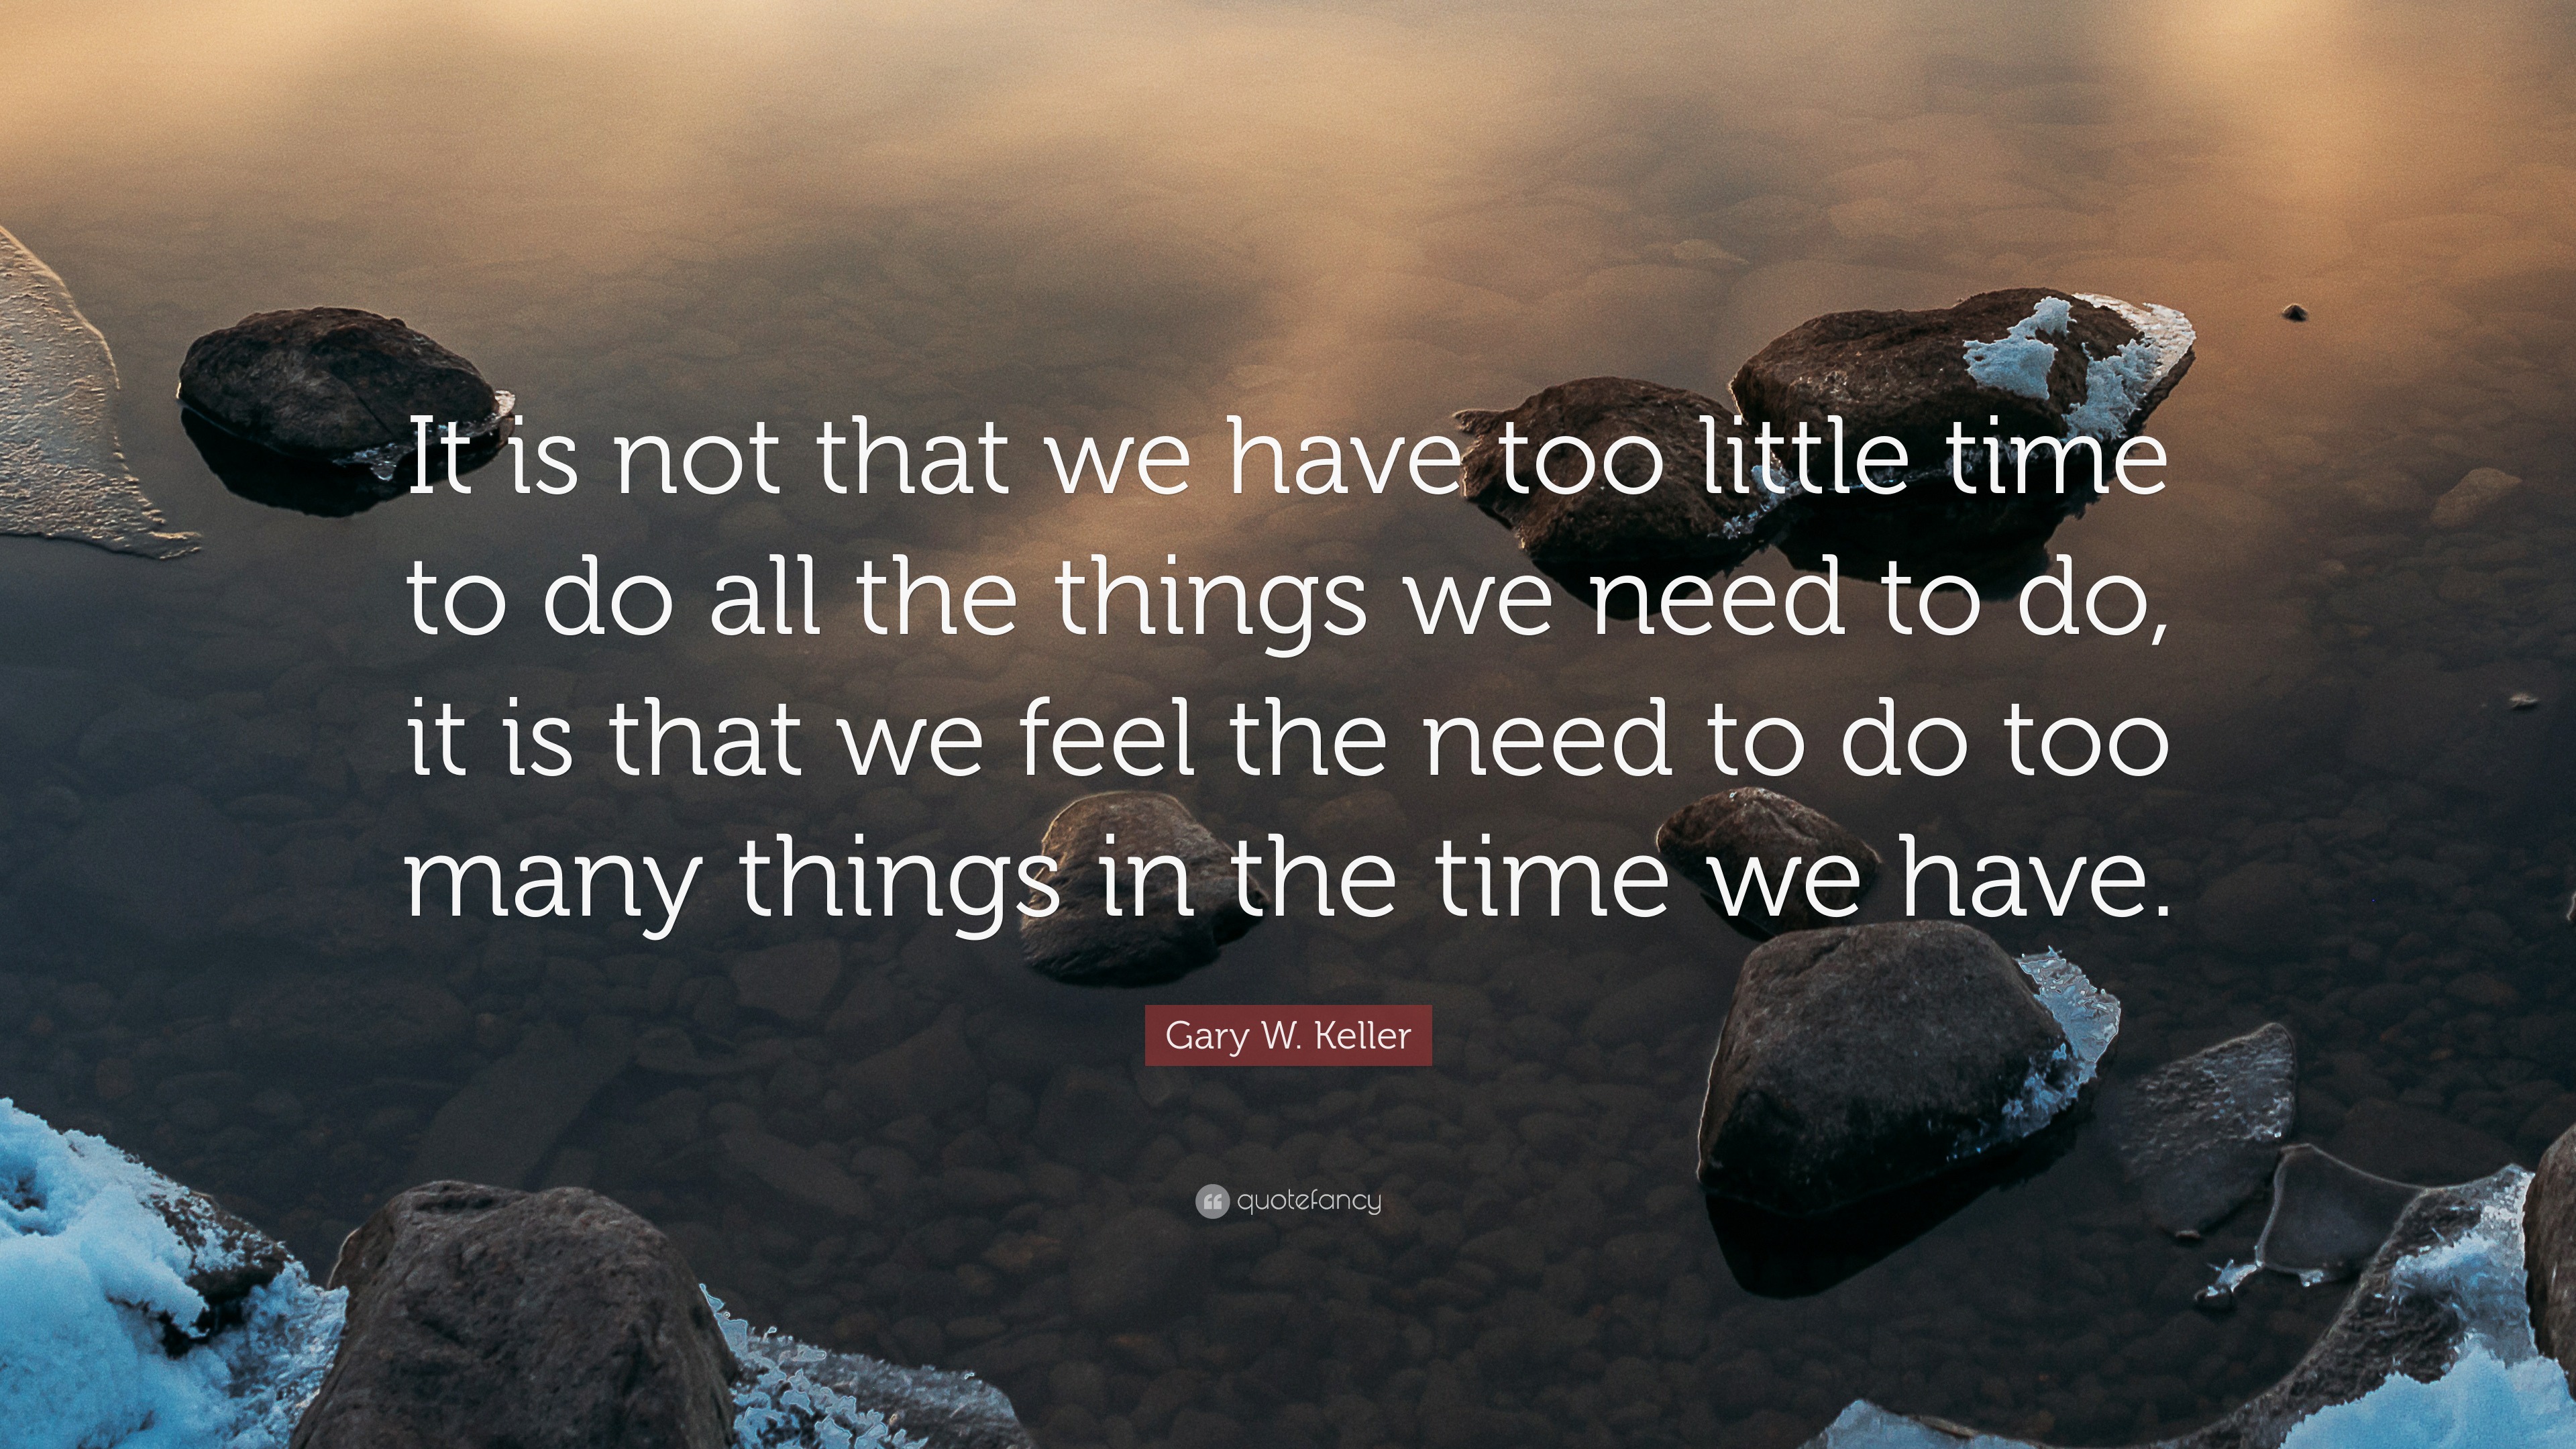 Gary Keller Quote: “It is not we have too time do all